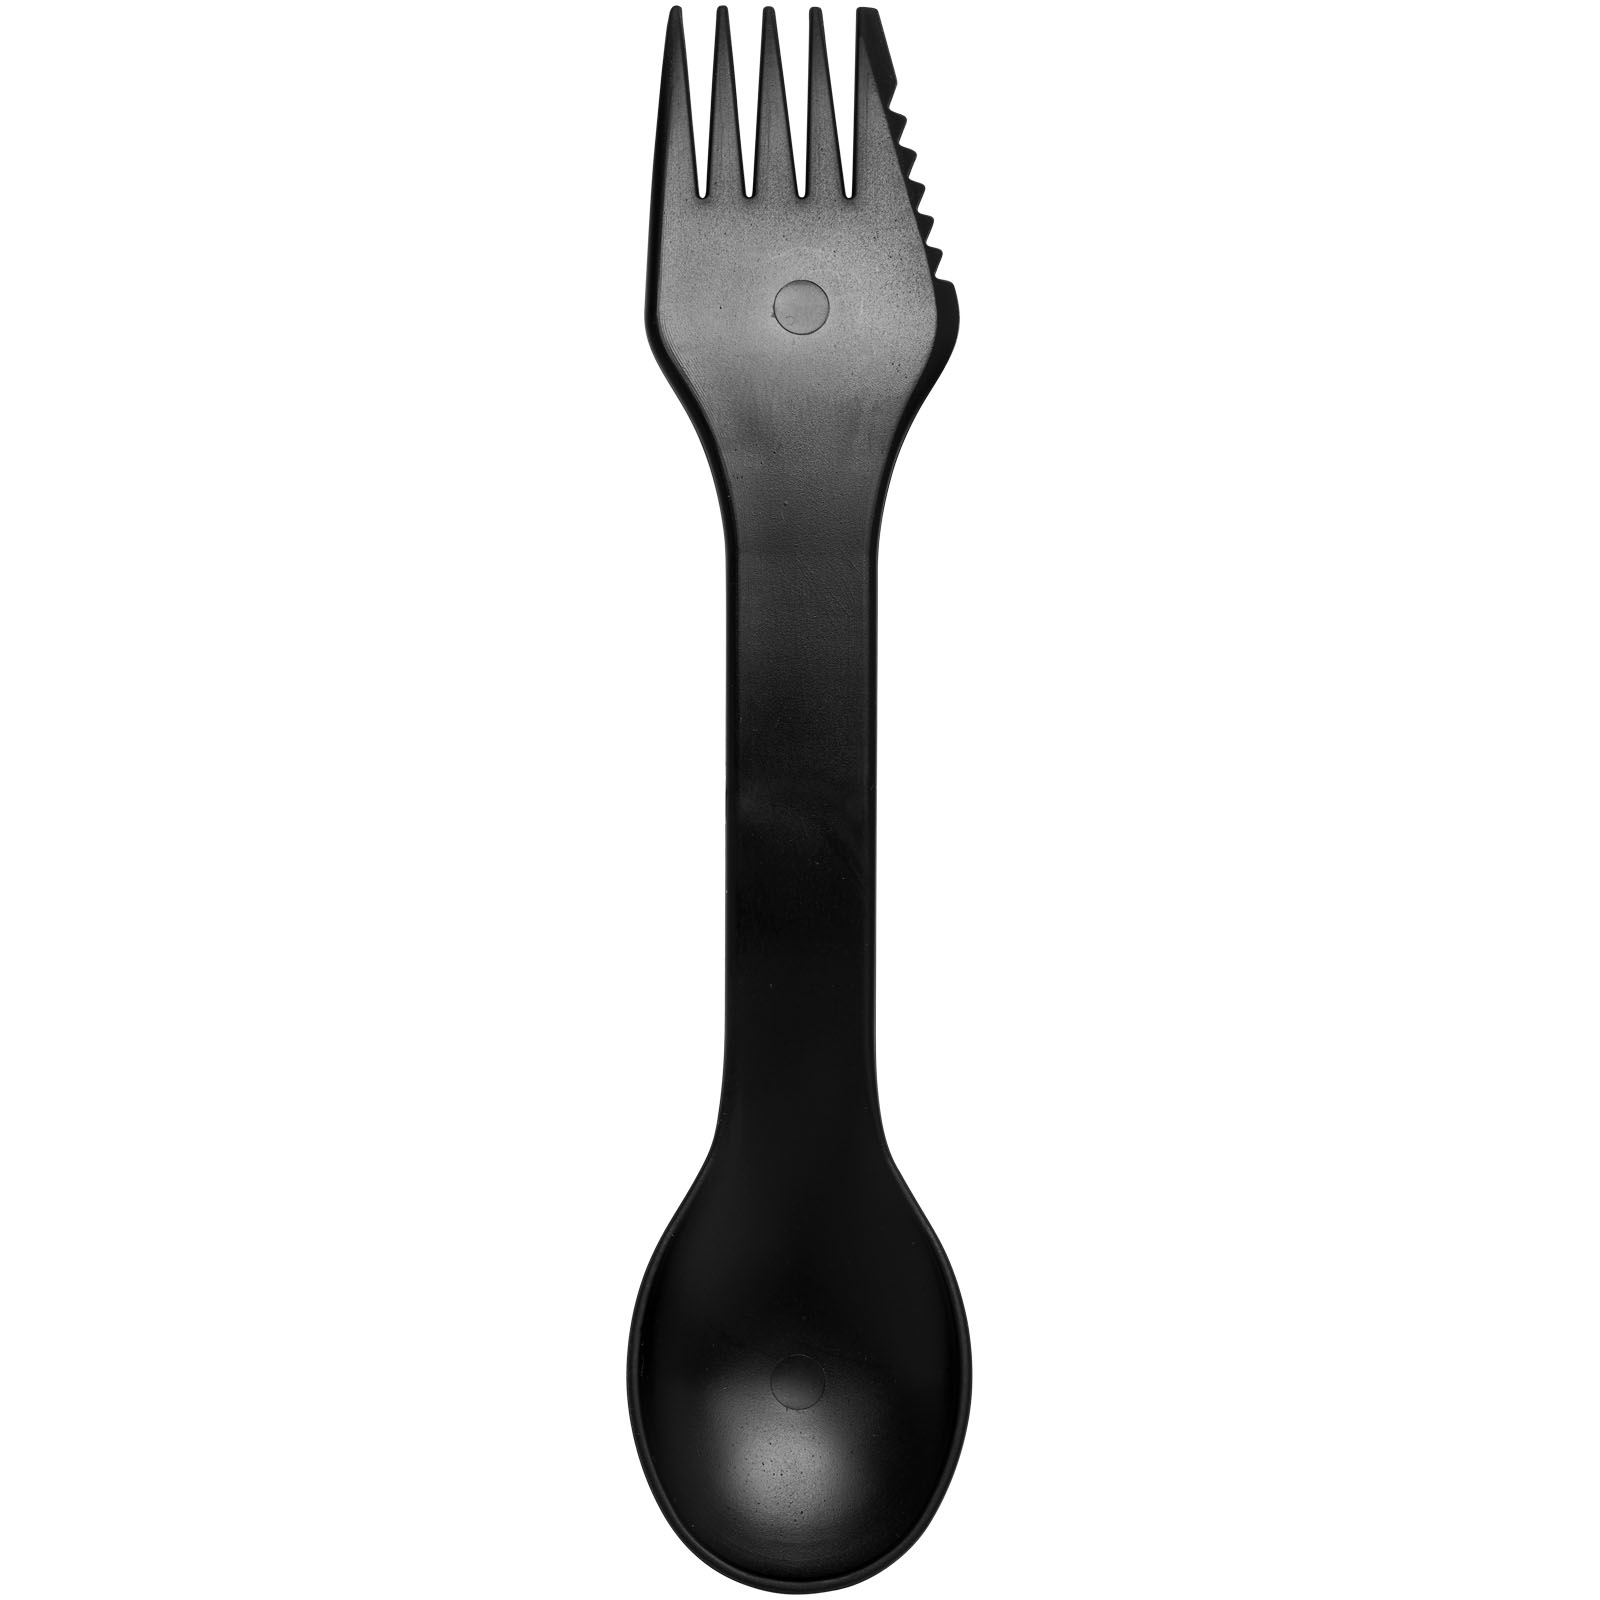 Advertising Kitchenware - Epsy 3-in-1 spoon, fork, and knife - 1